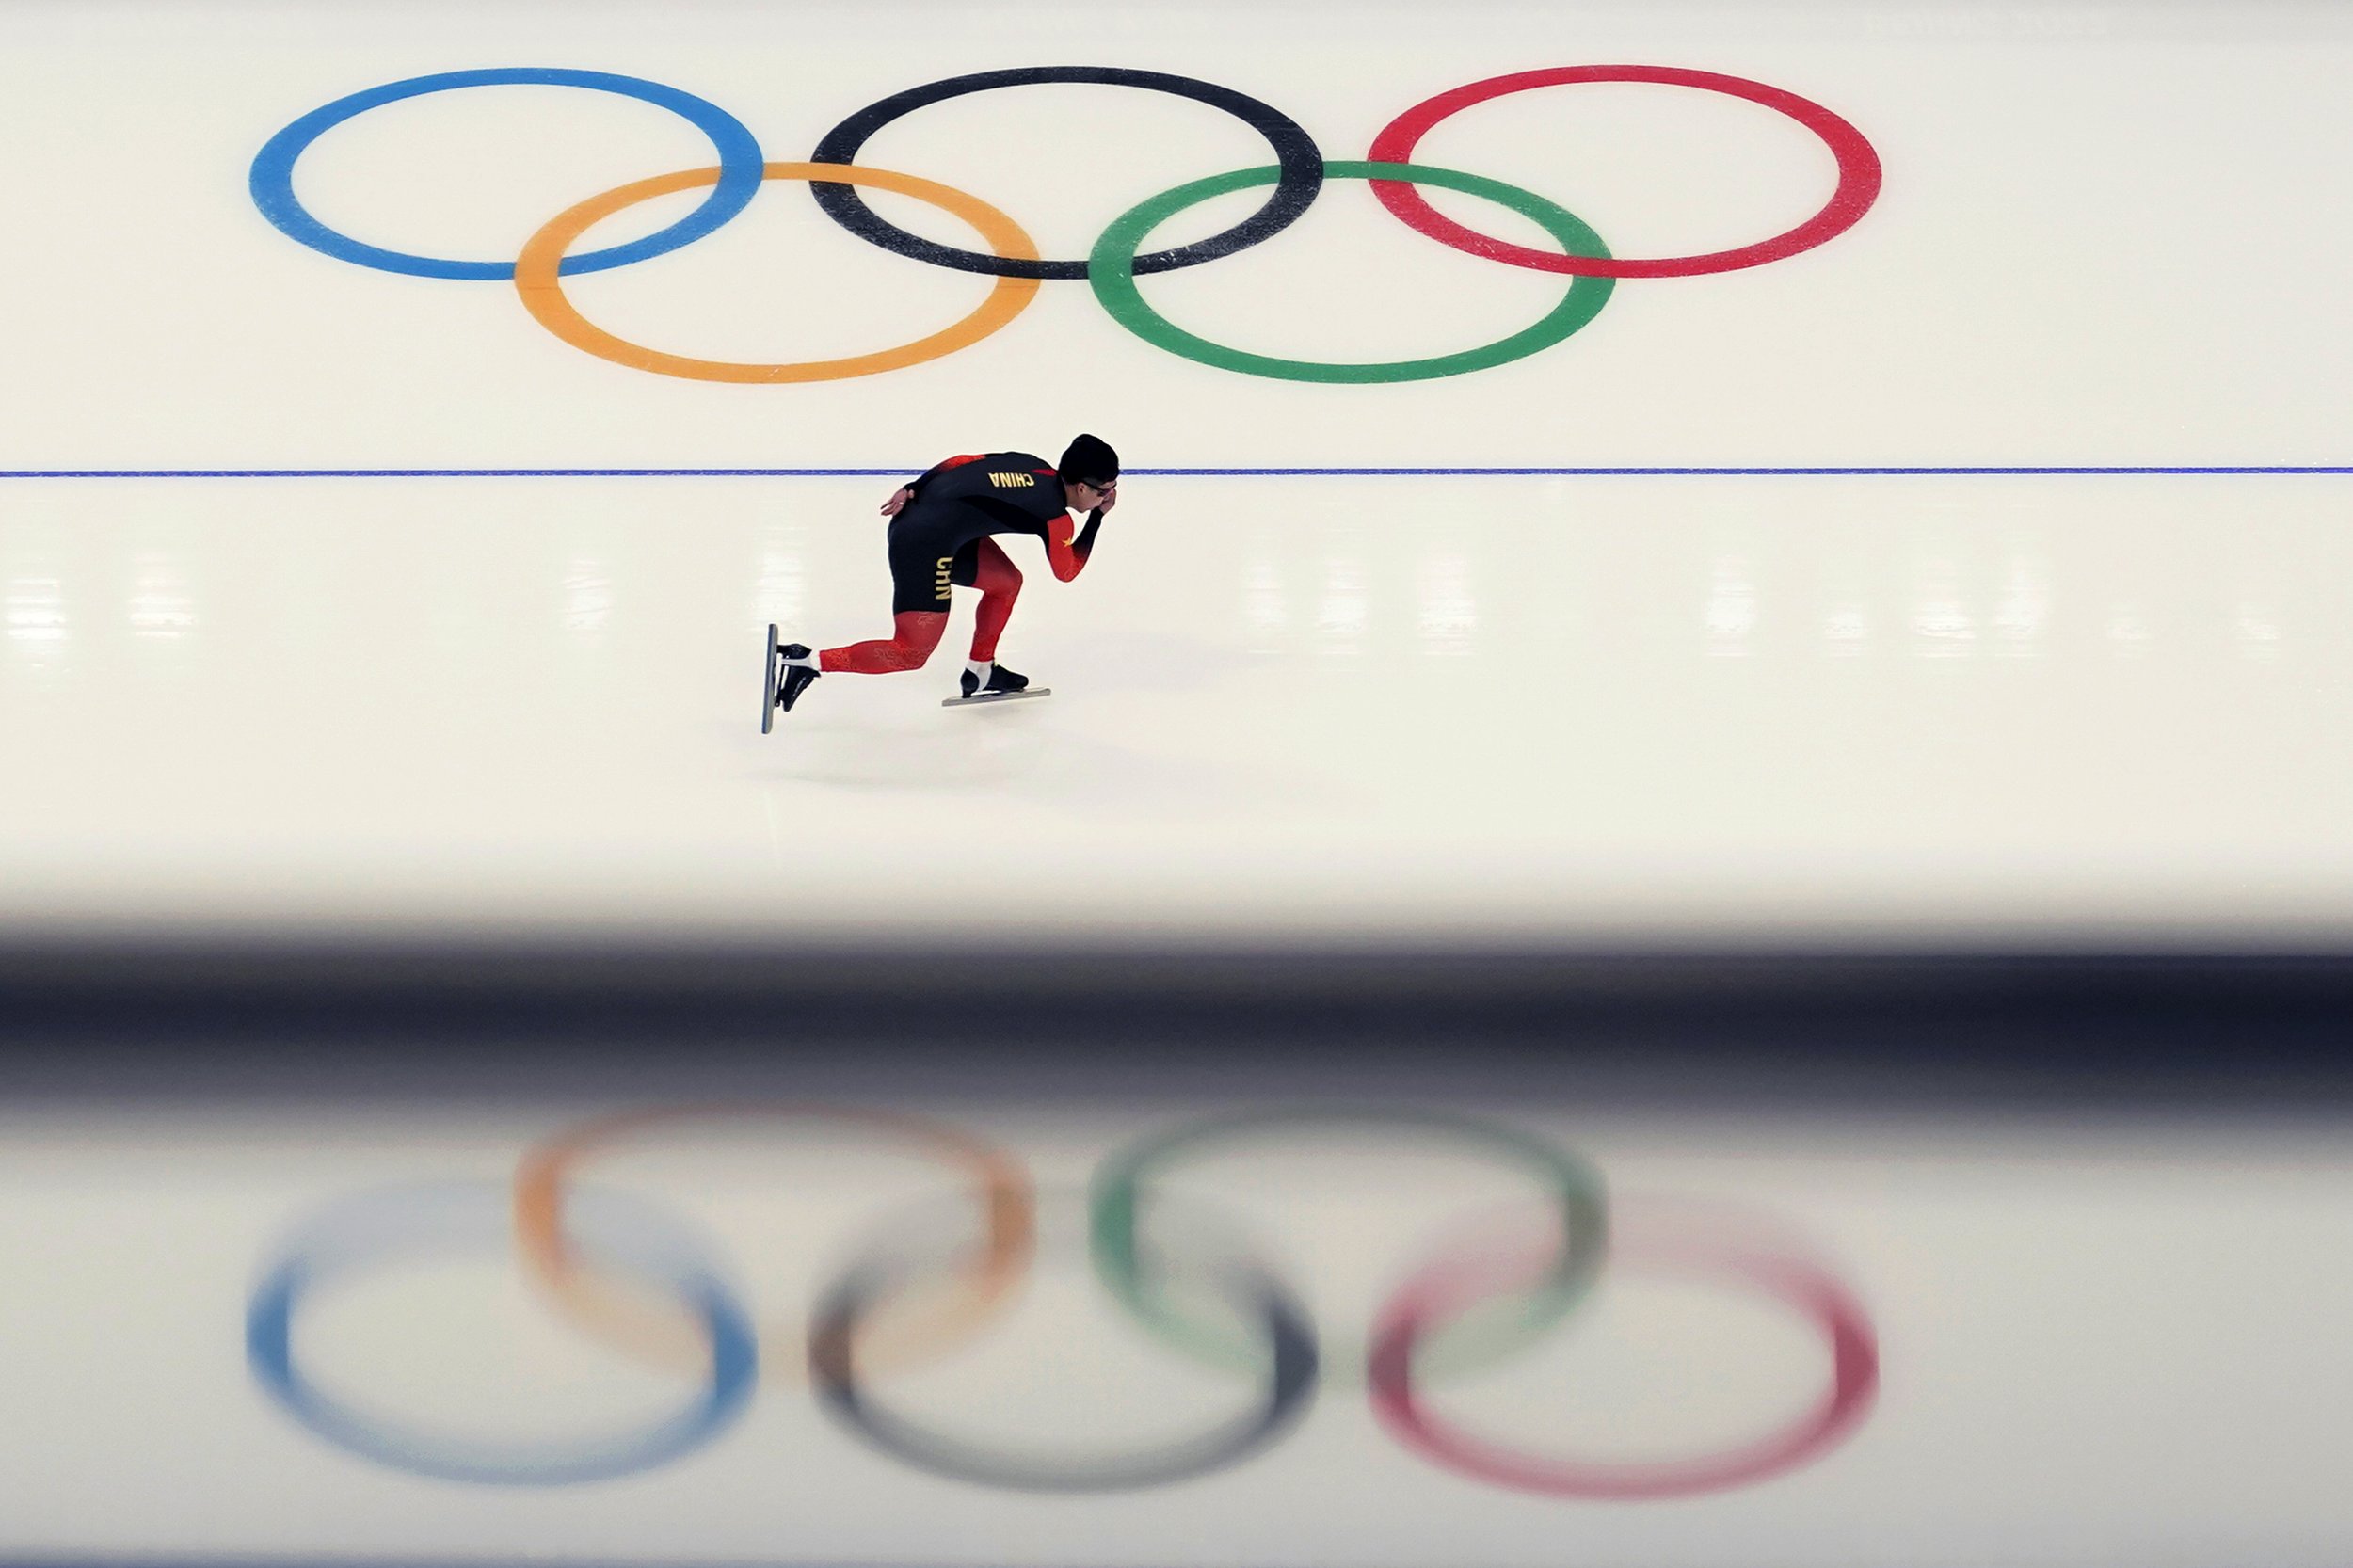  A Chinese athlete warms up before the start of the men's speedskating 1,500-meter race at the 2022 Winter Olympics, Tuesday, Feb. 8, 2022, in Beijing. (AP Photo/Ashley Landis) 